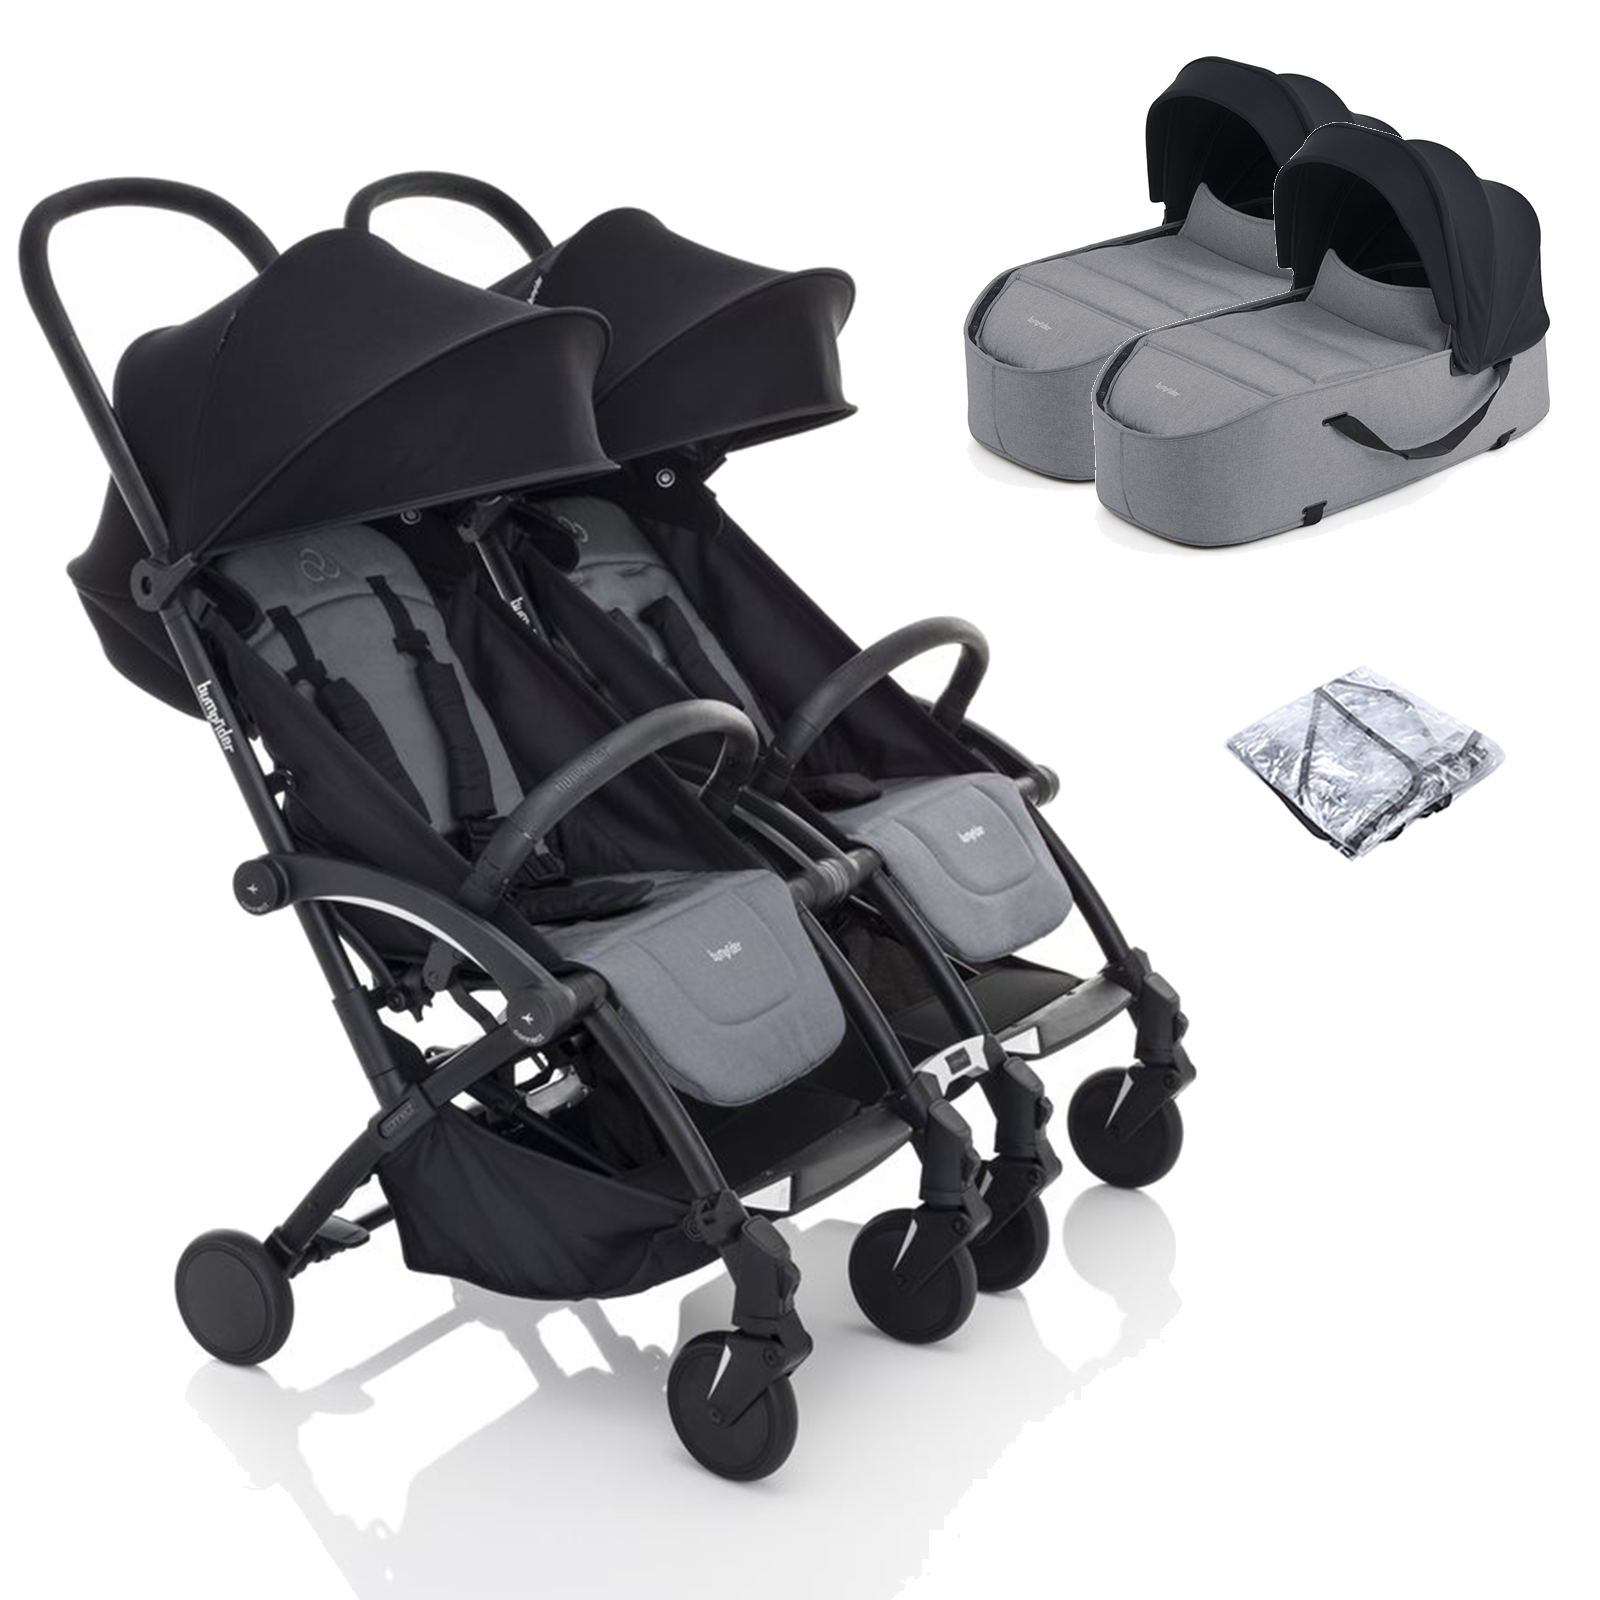 Bumprider Connect2 Double Stroller with Carrycot - Black & Grey